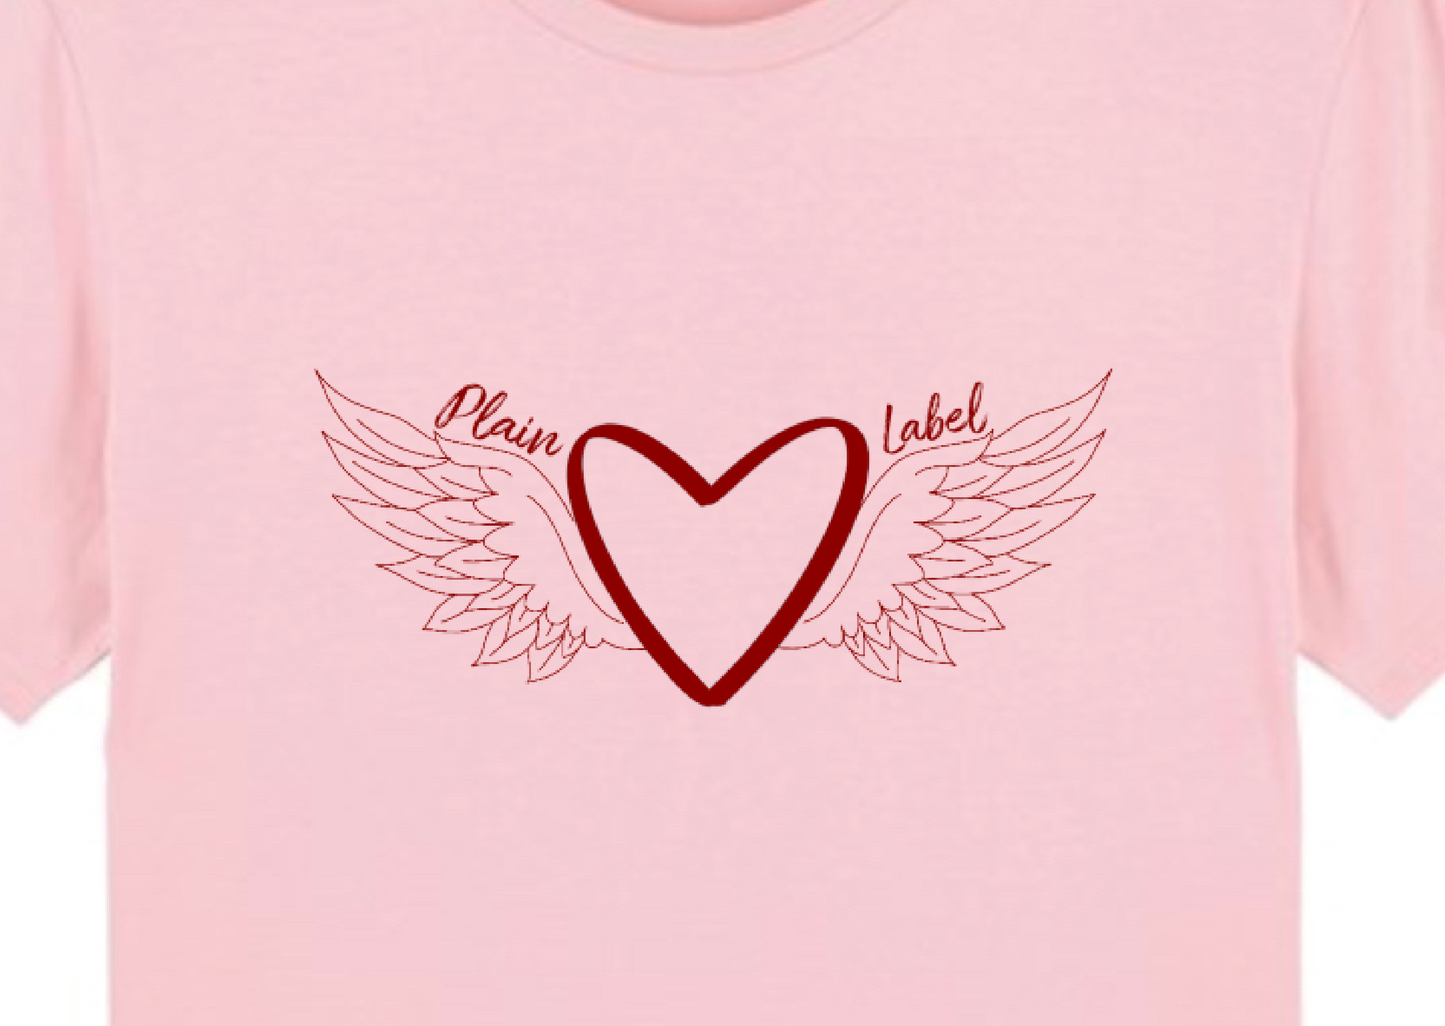 THE "WINGS OF LOVE" T-SHIRT